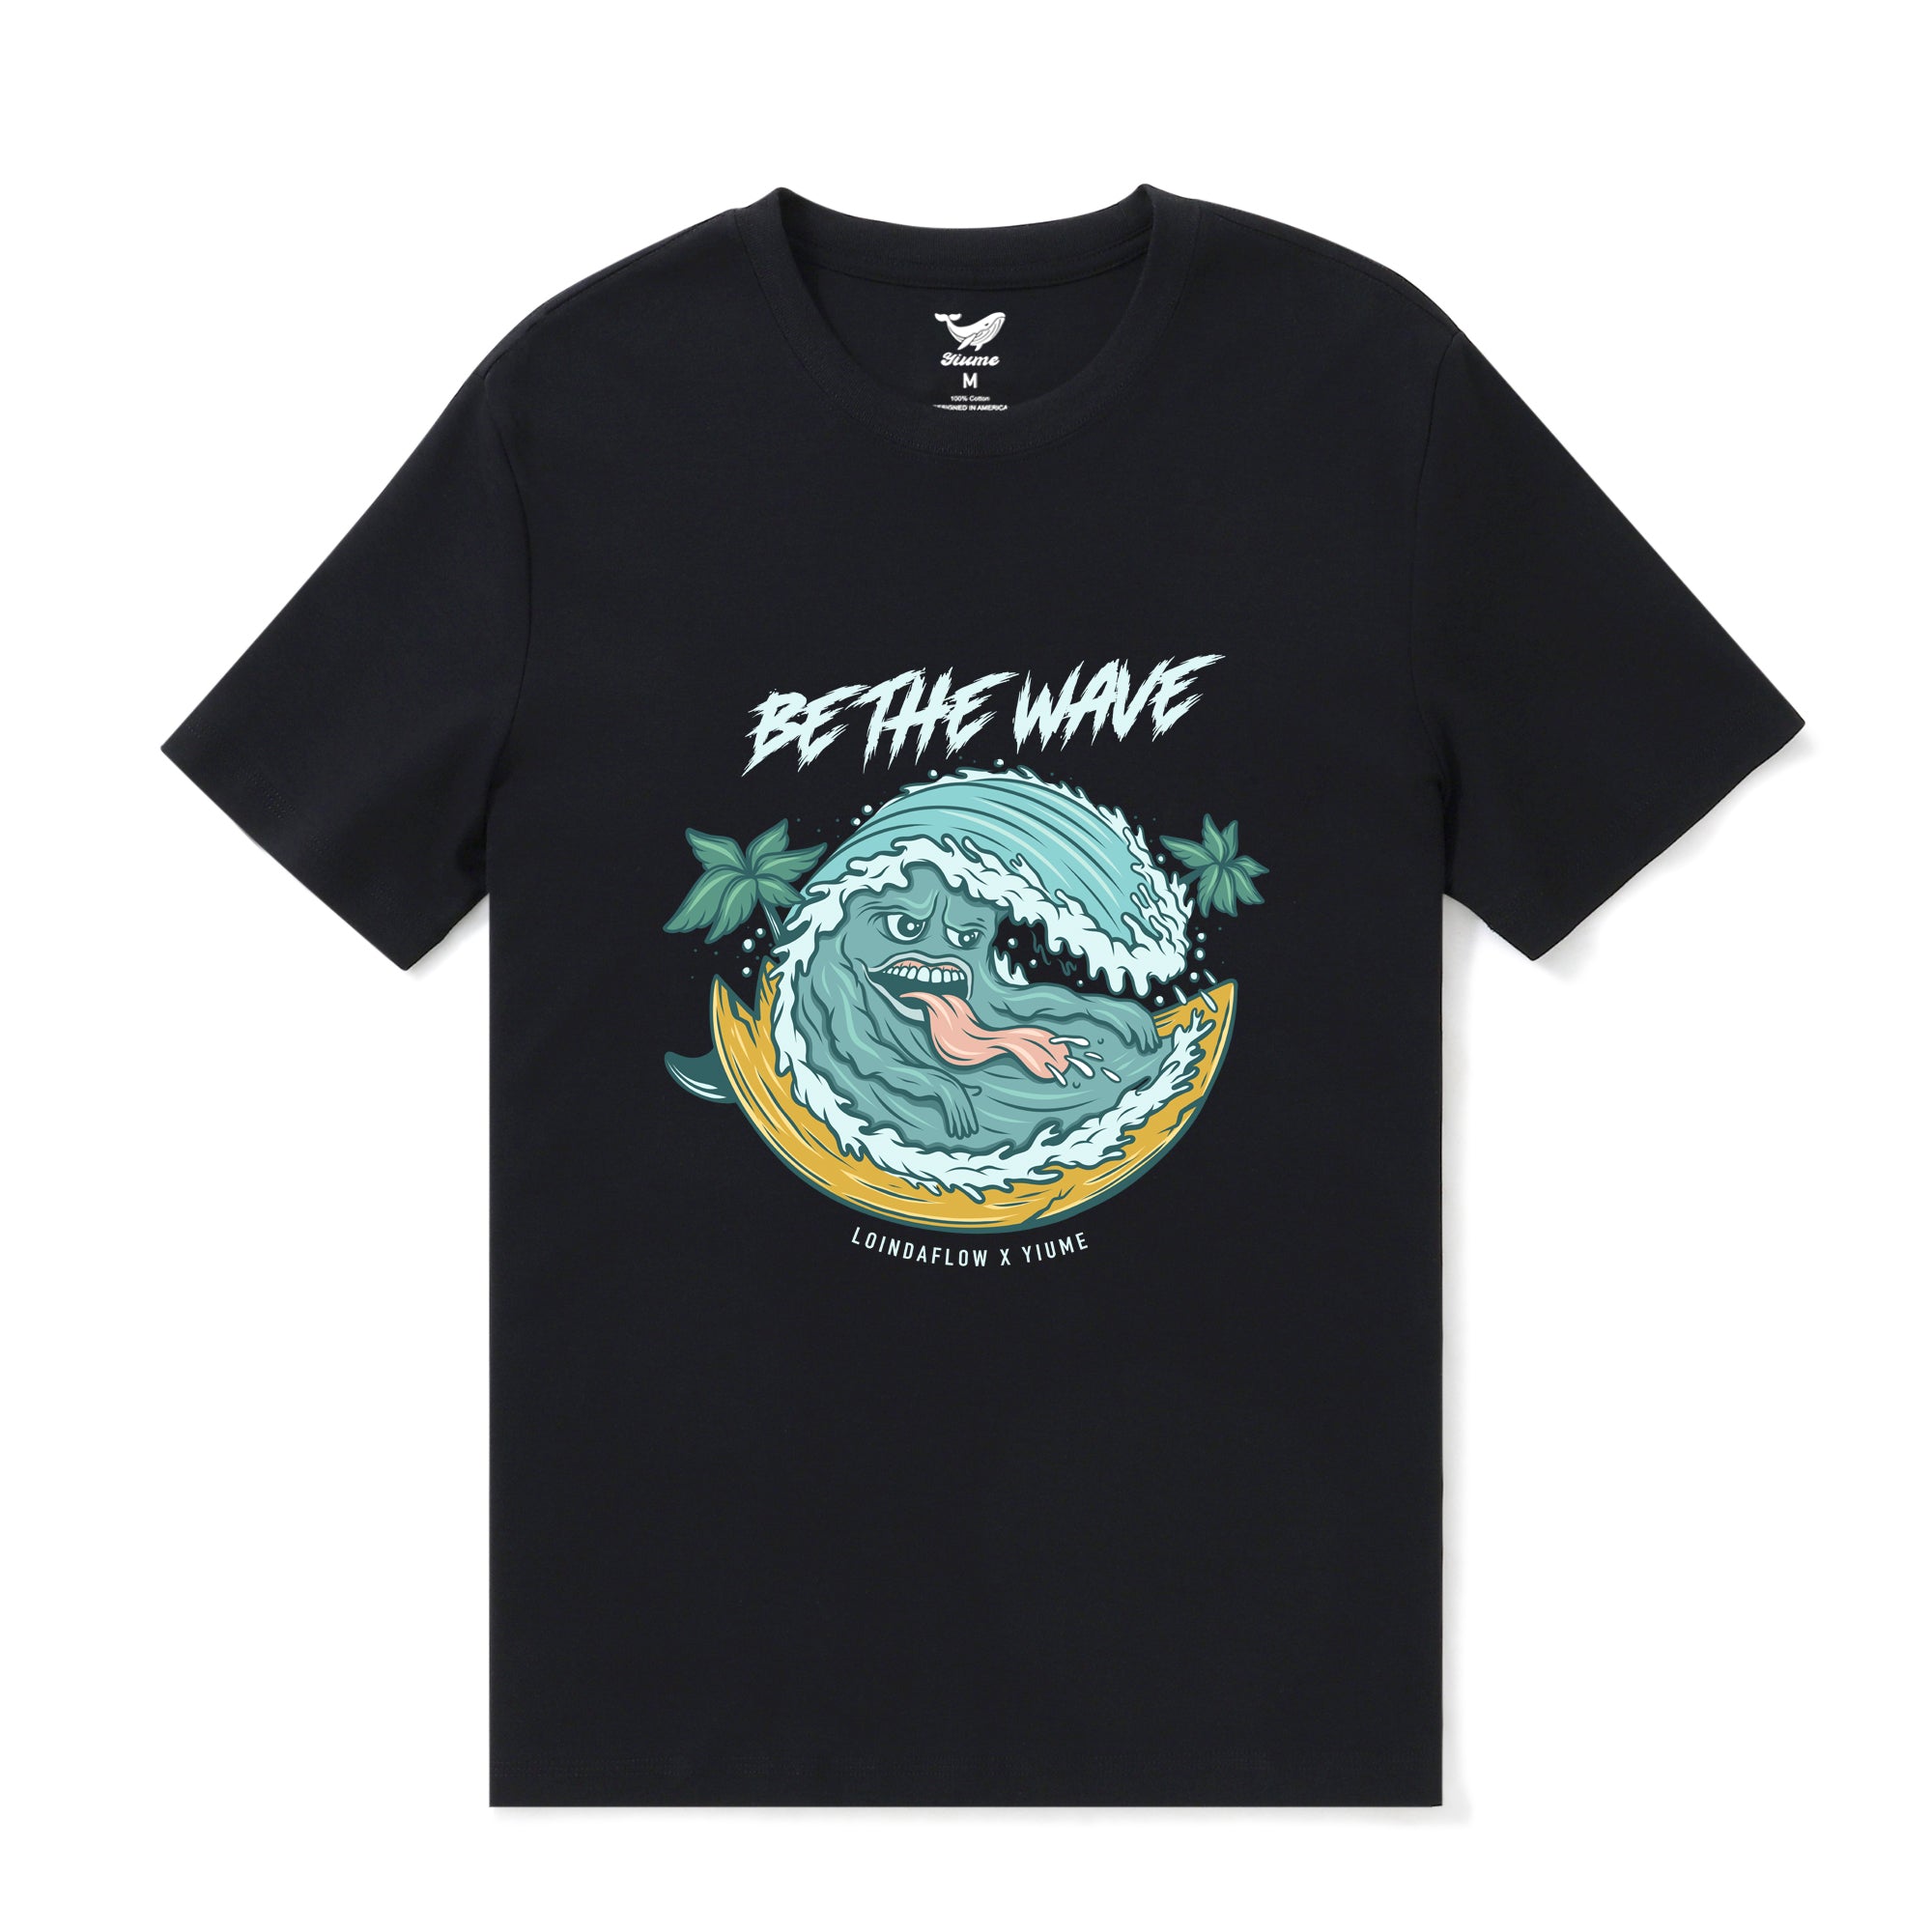 Hawaiian Tee For Men Be the Wave By Loindaflow Tee Crew Neck 100% Cotton - BLACK